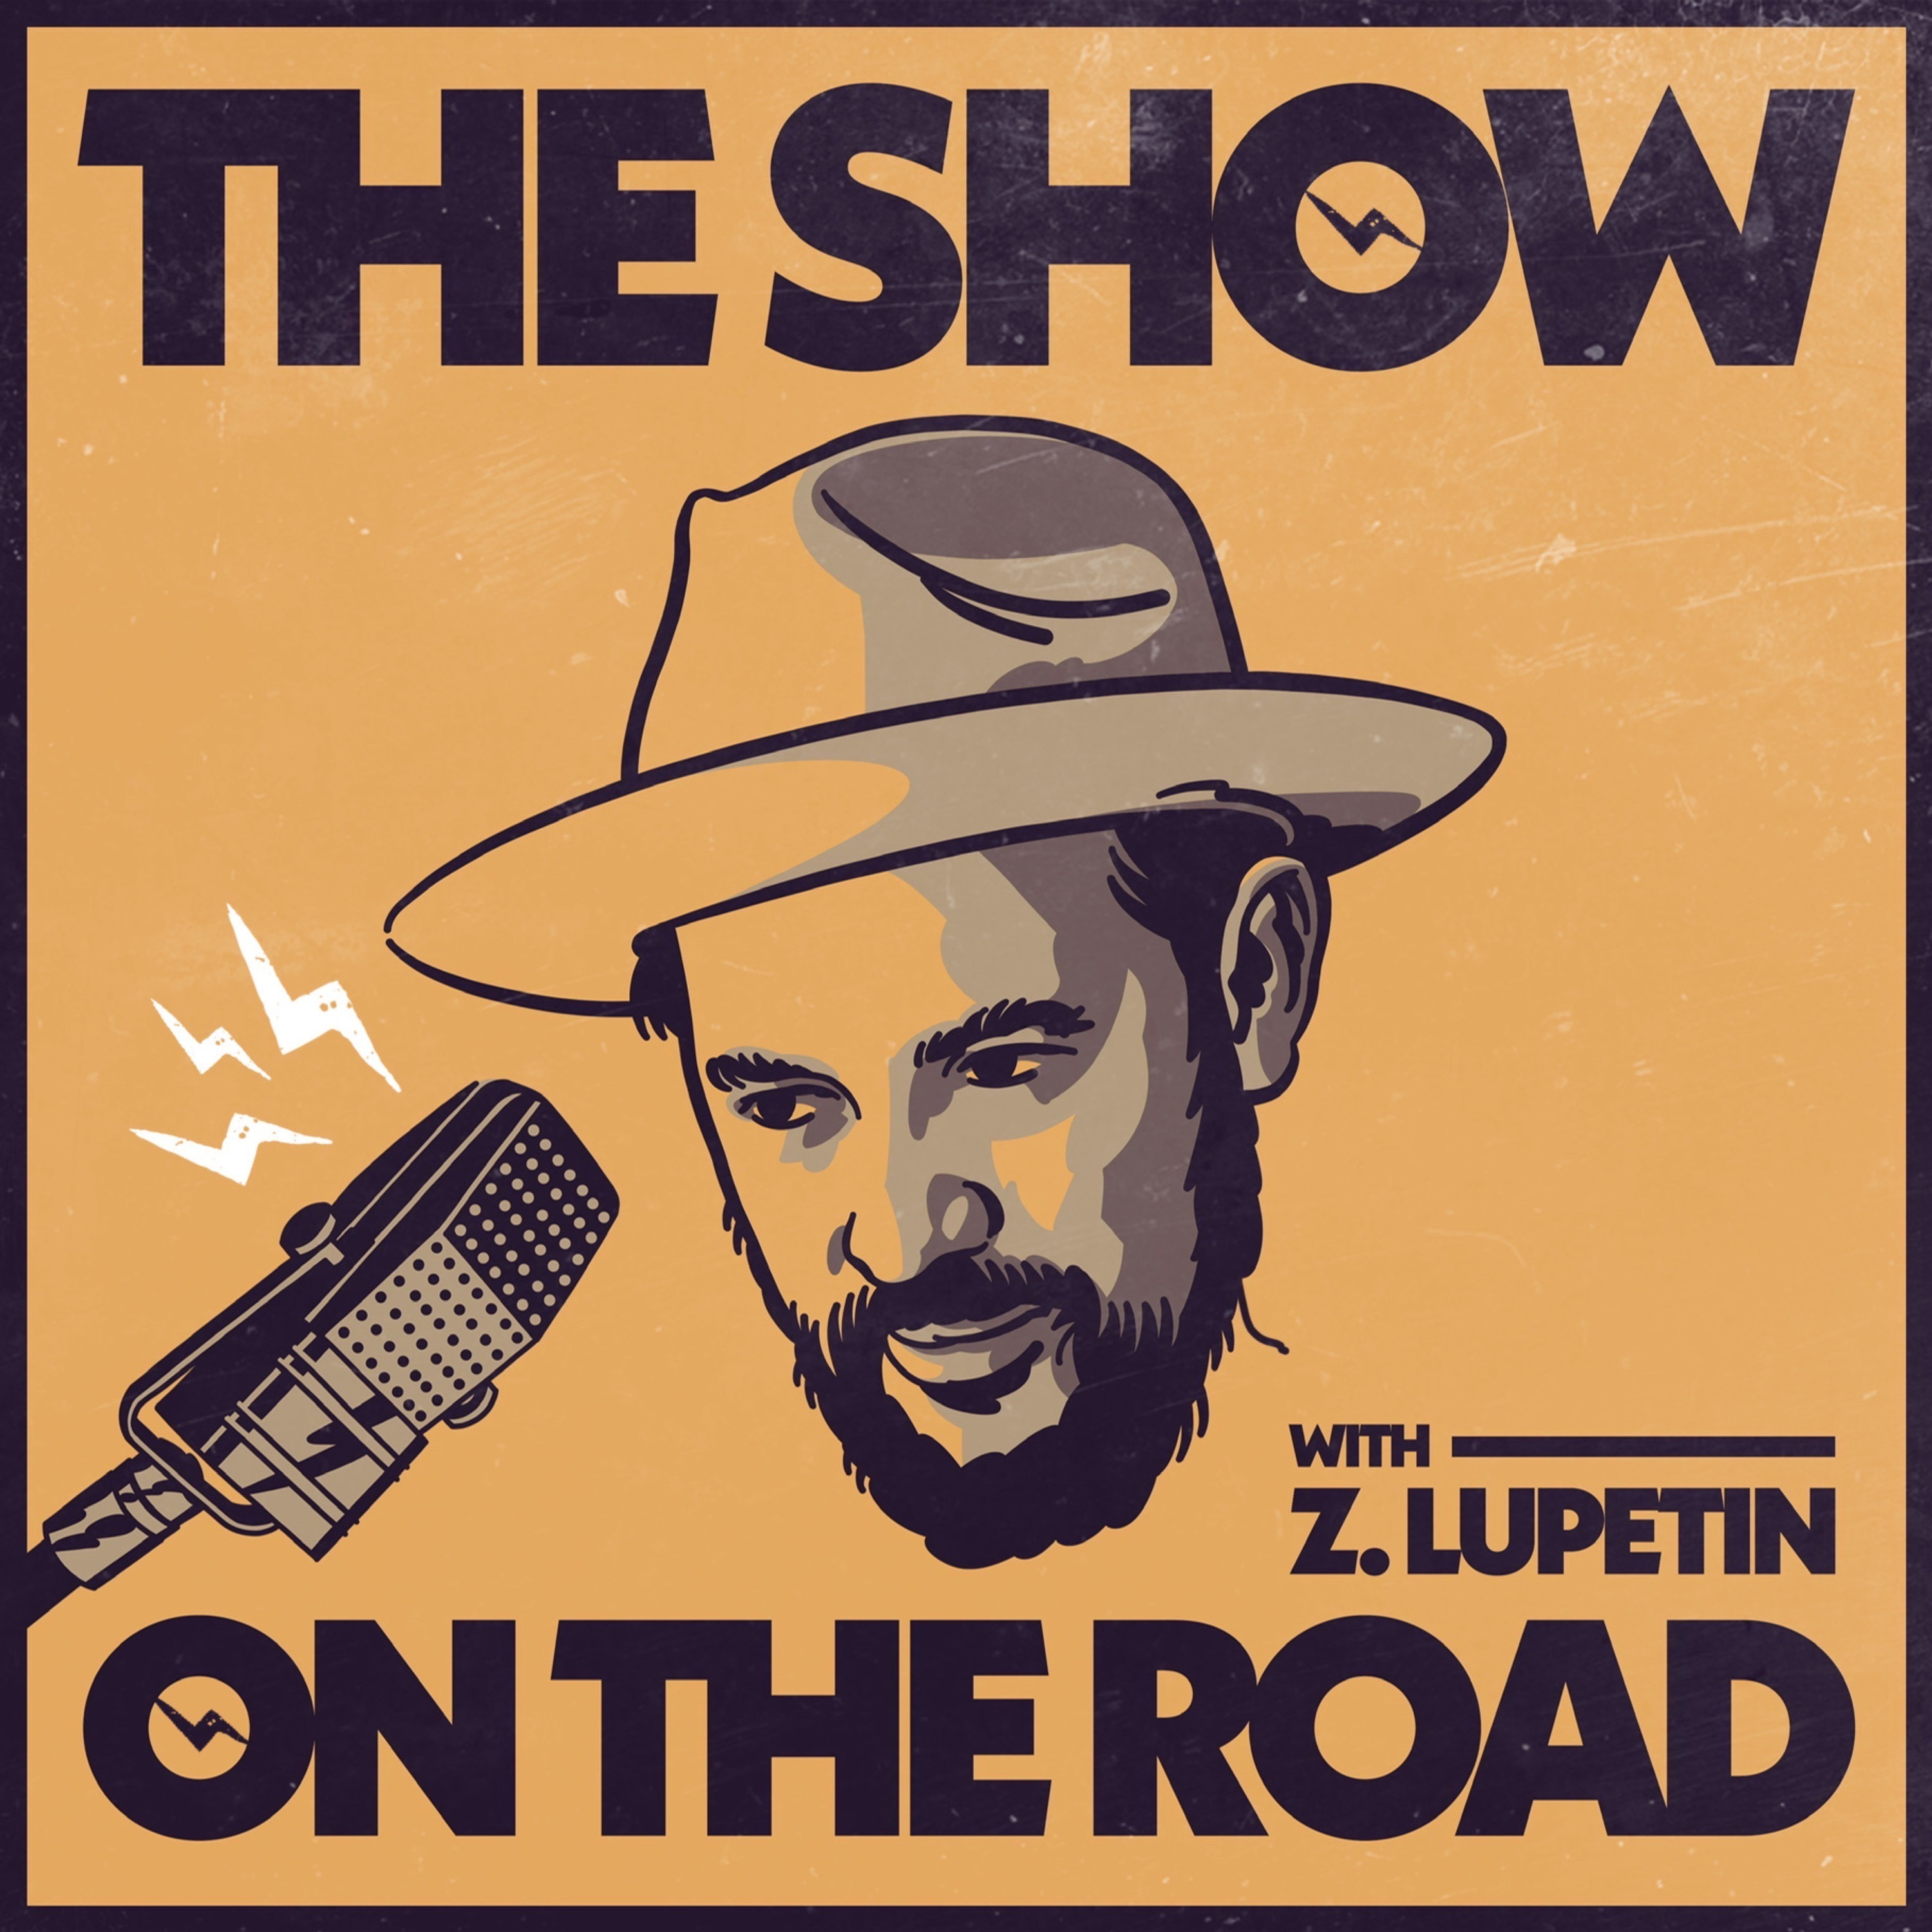 Destiny Stephens Porn - The Show On The Road with Z. Lupetin | RedCircle